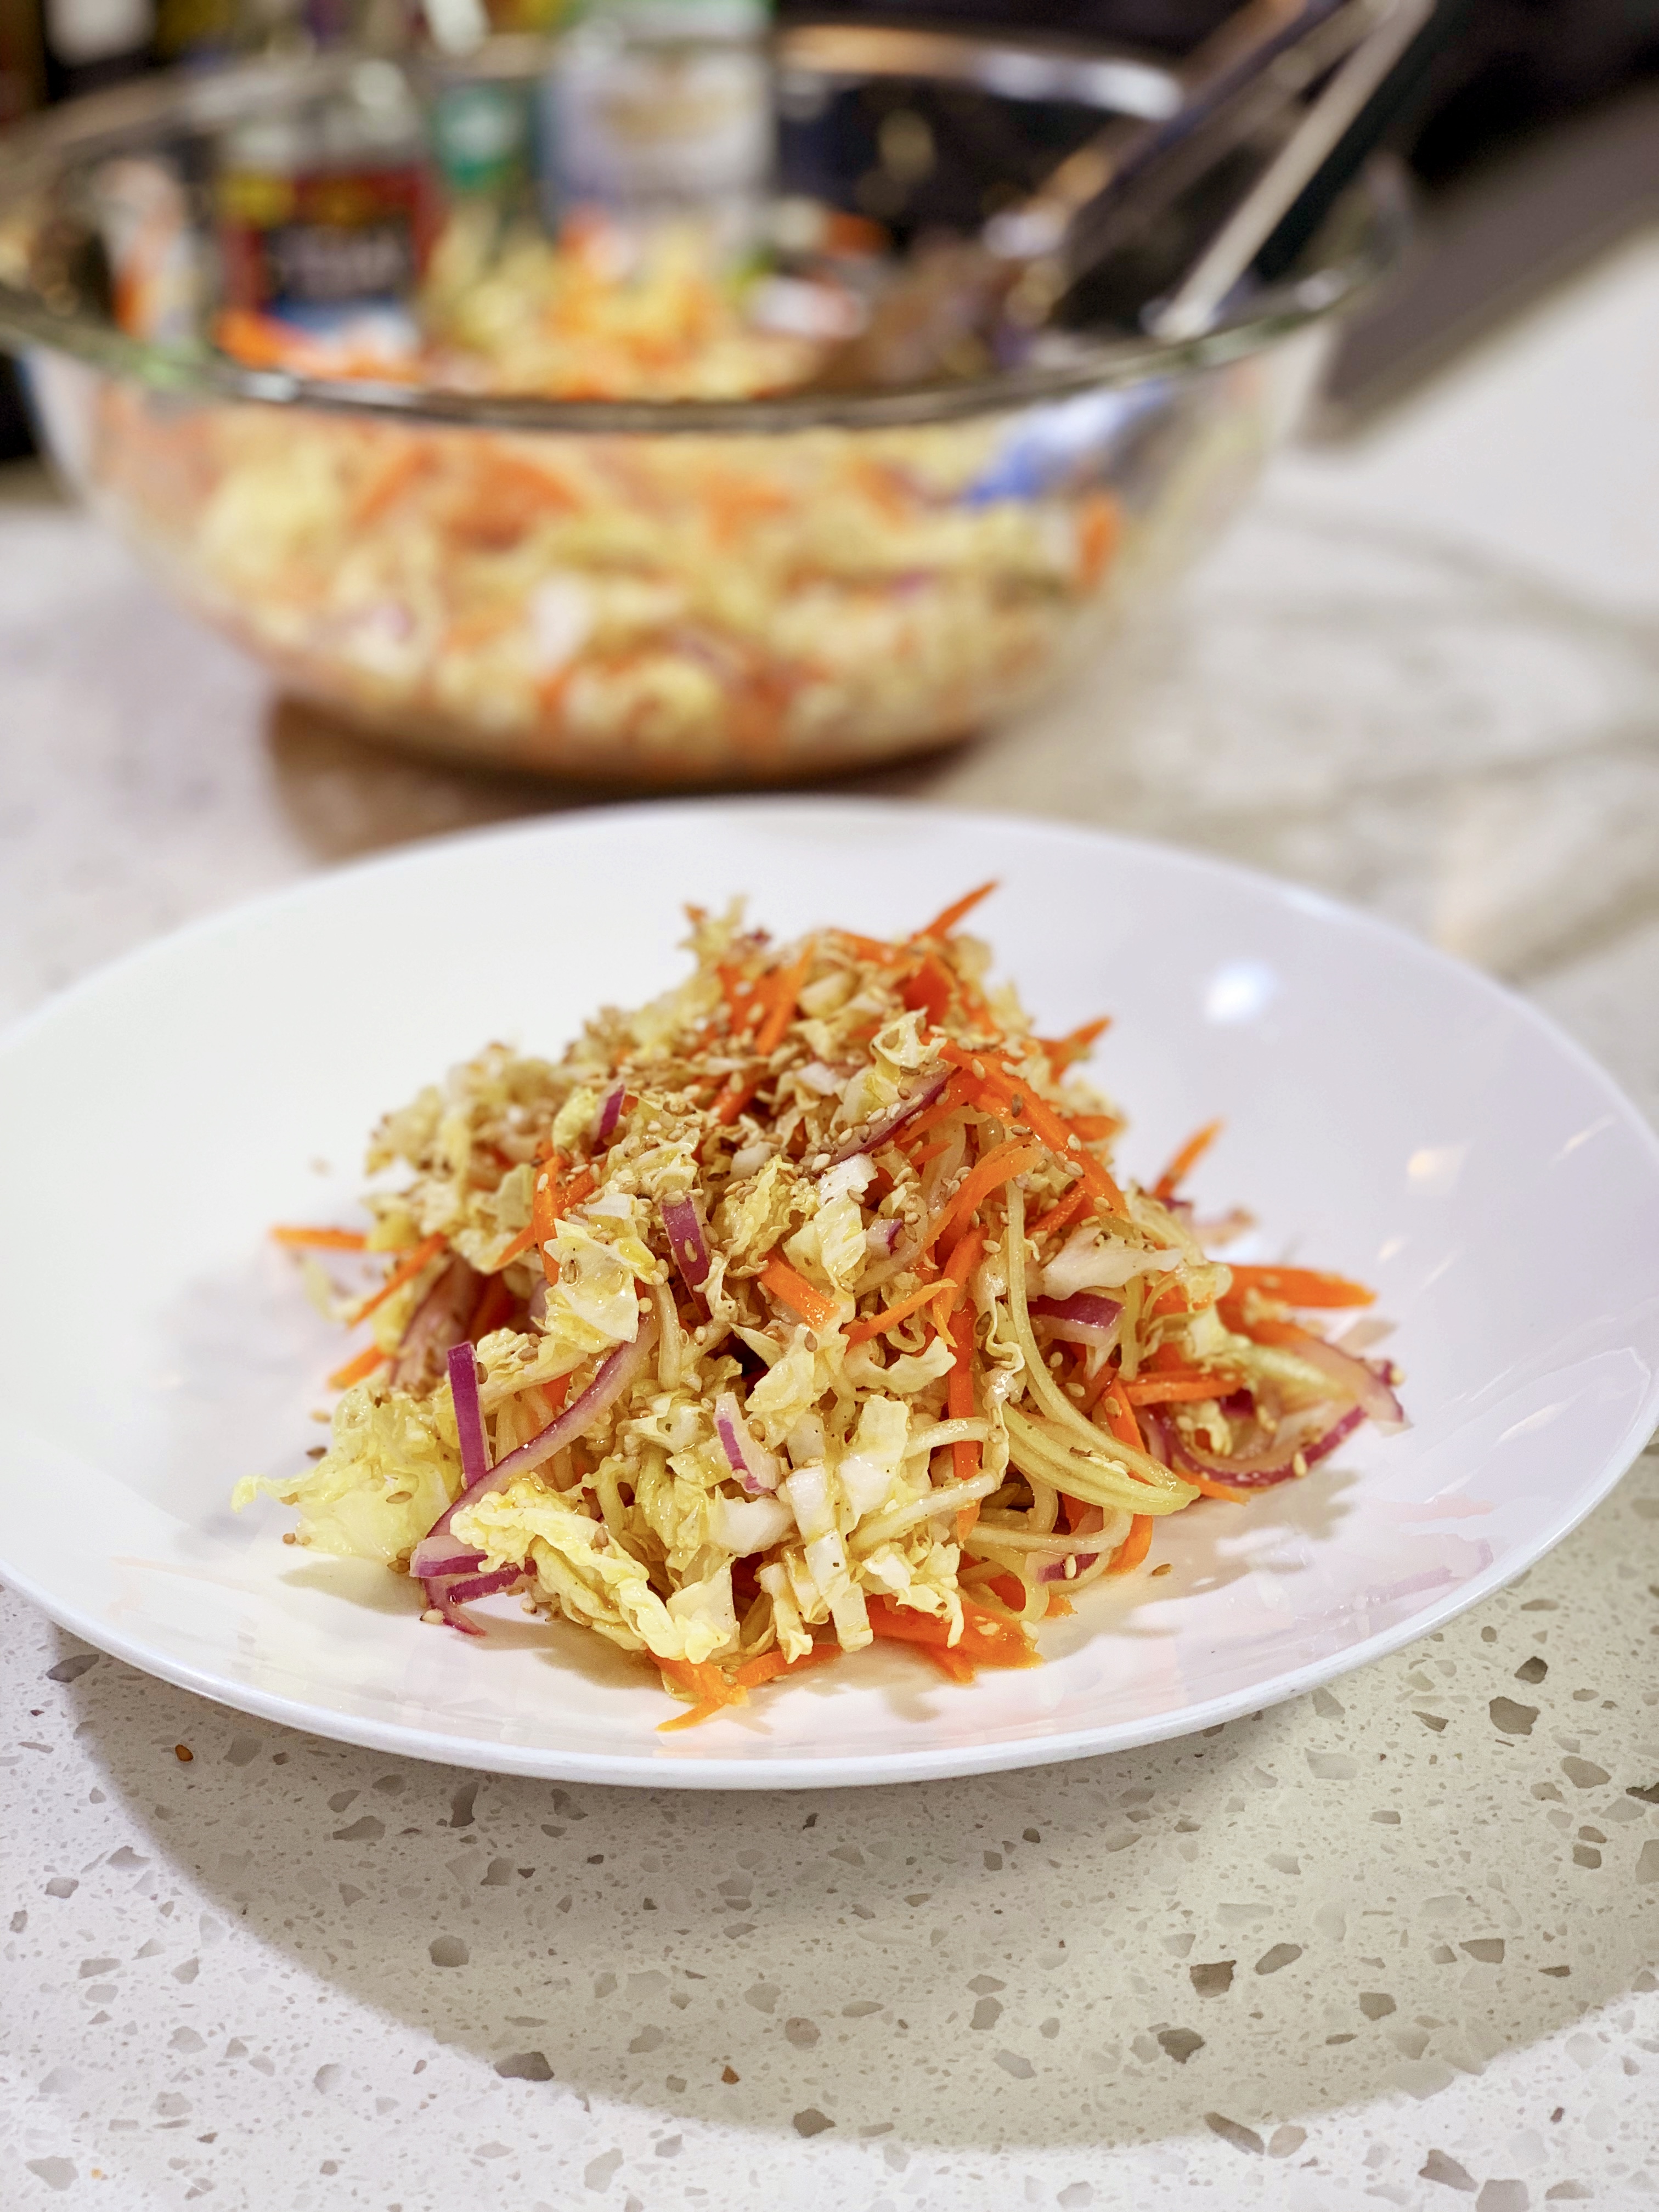 Bamboo Shoot Asian bryan Salad - cooking with chef